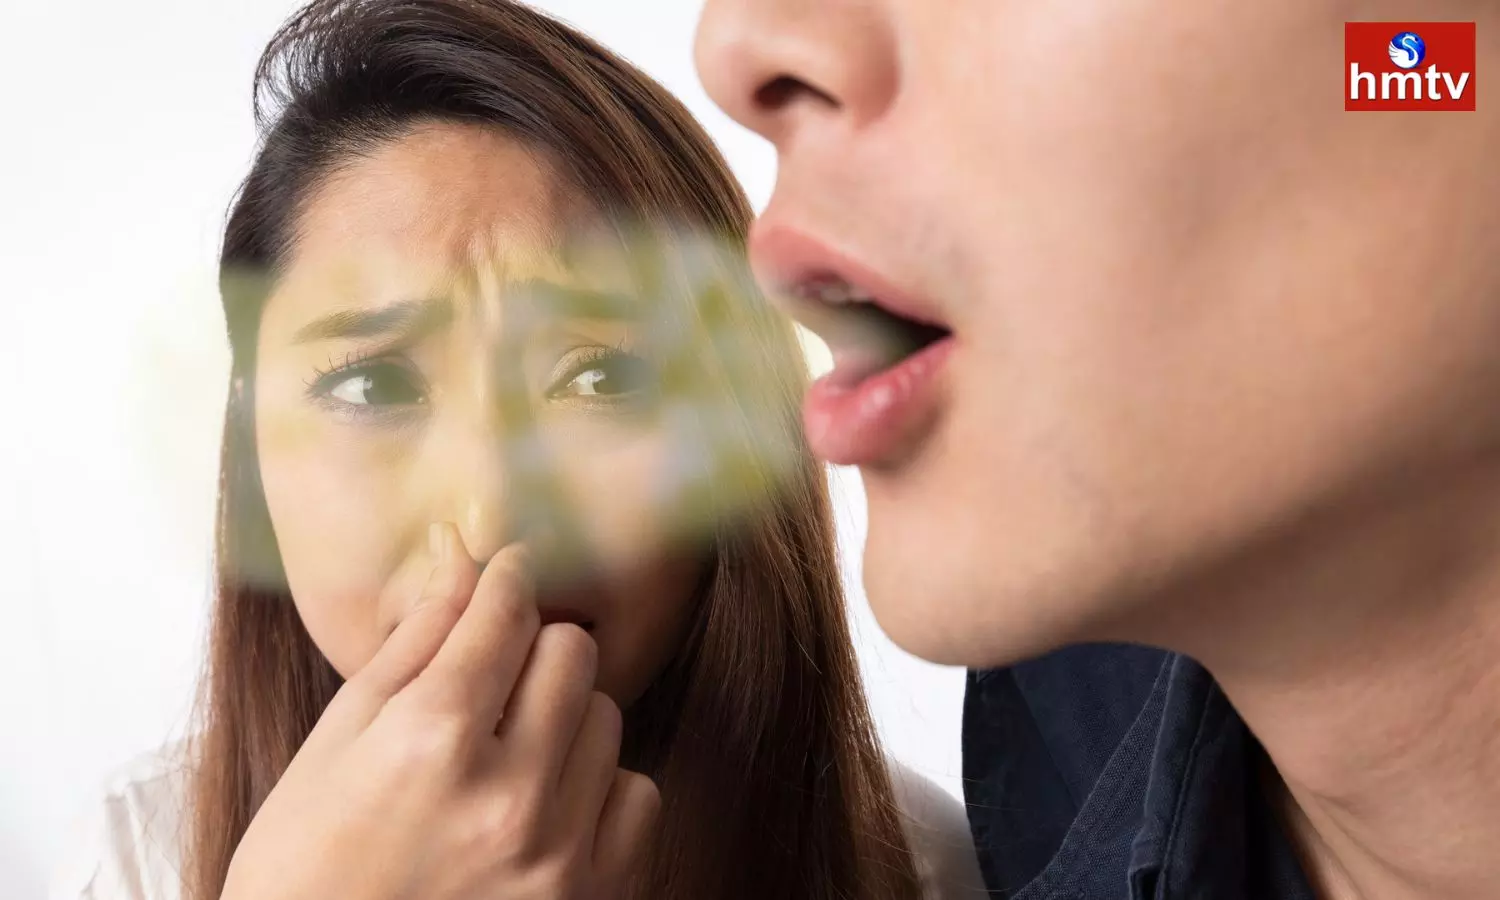 Bad breath causes trouble in public follow these tips